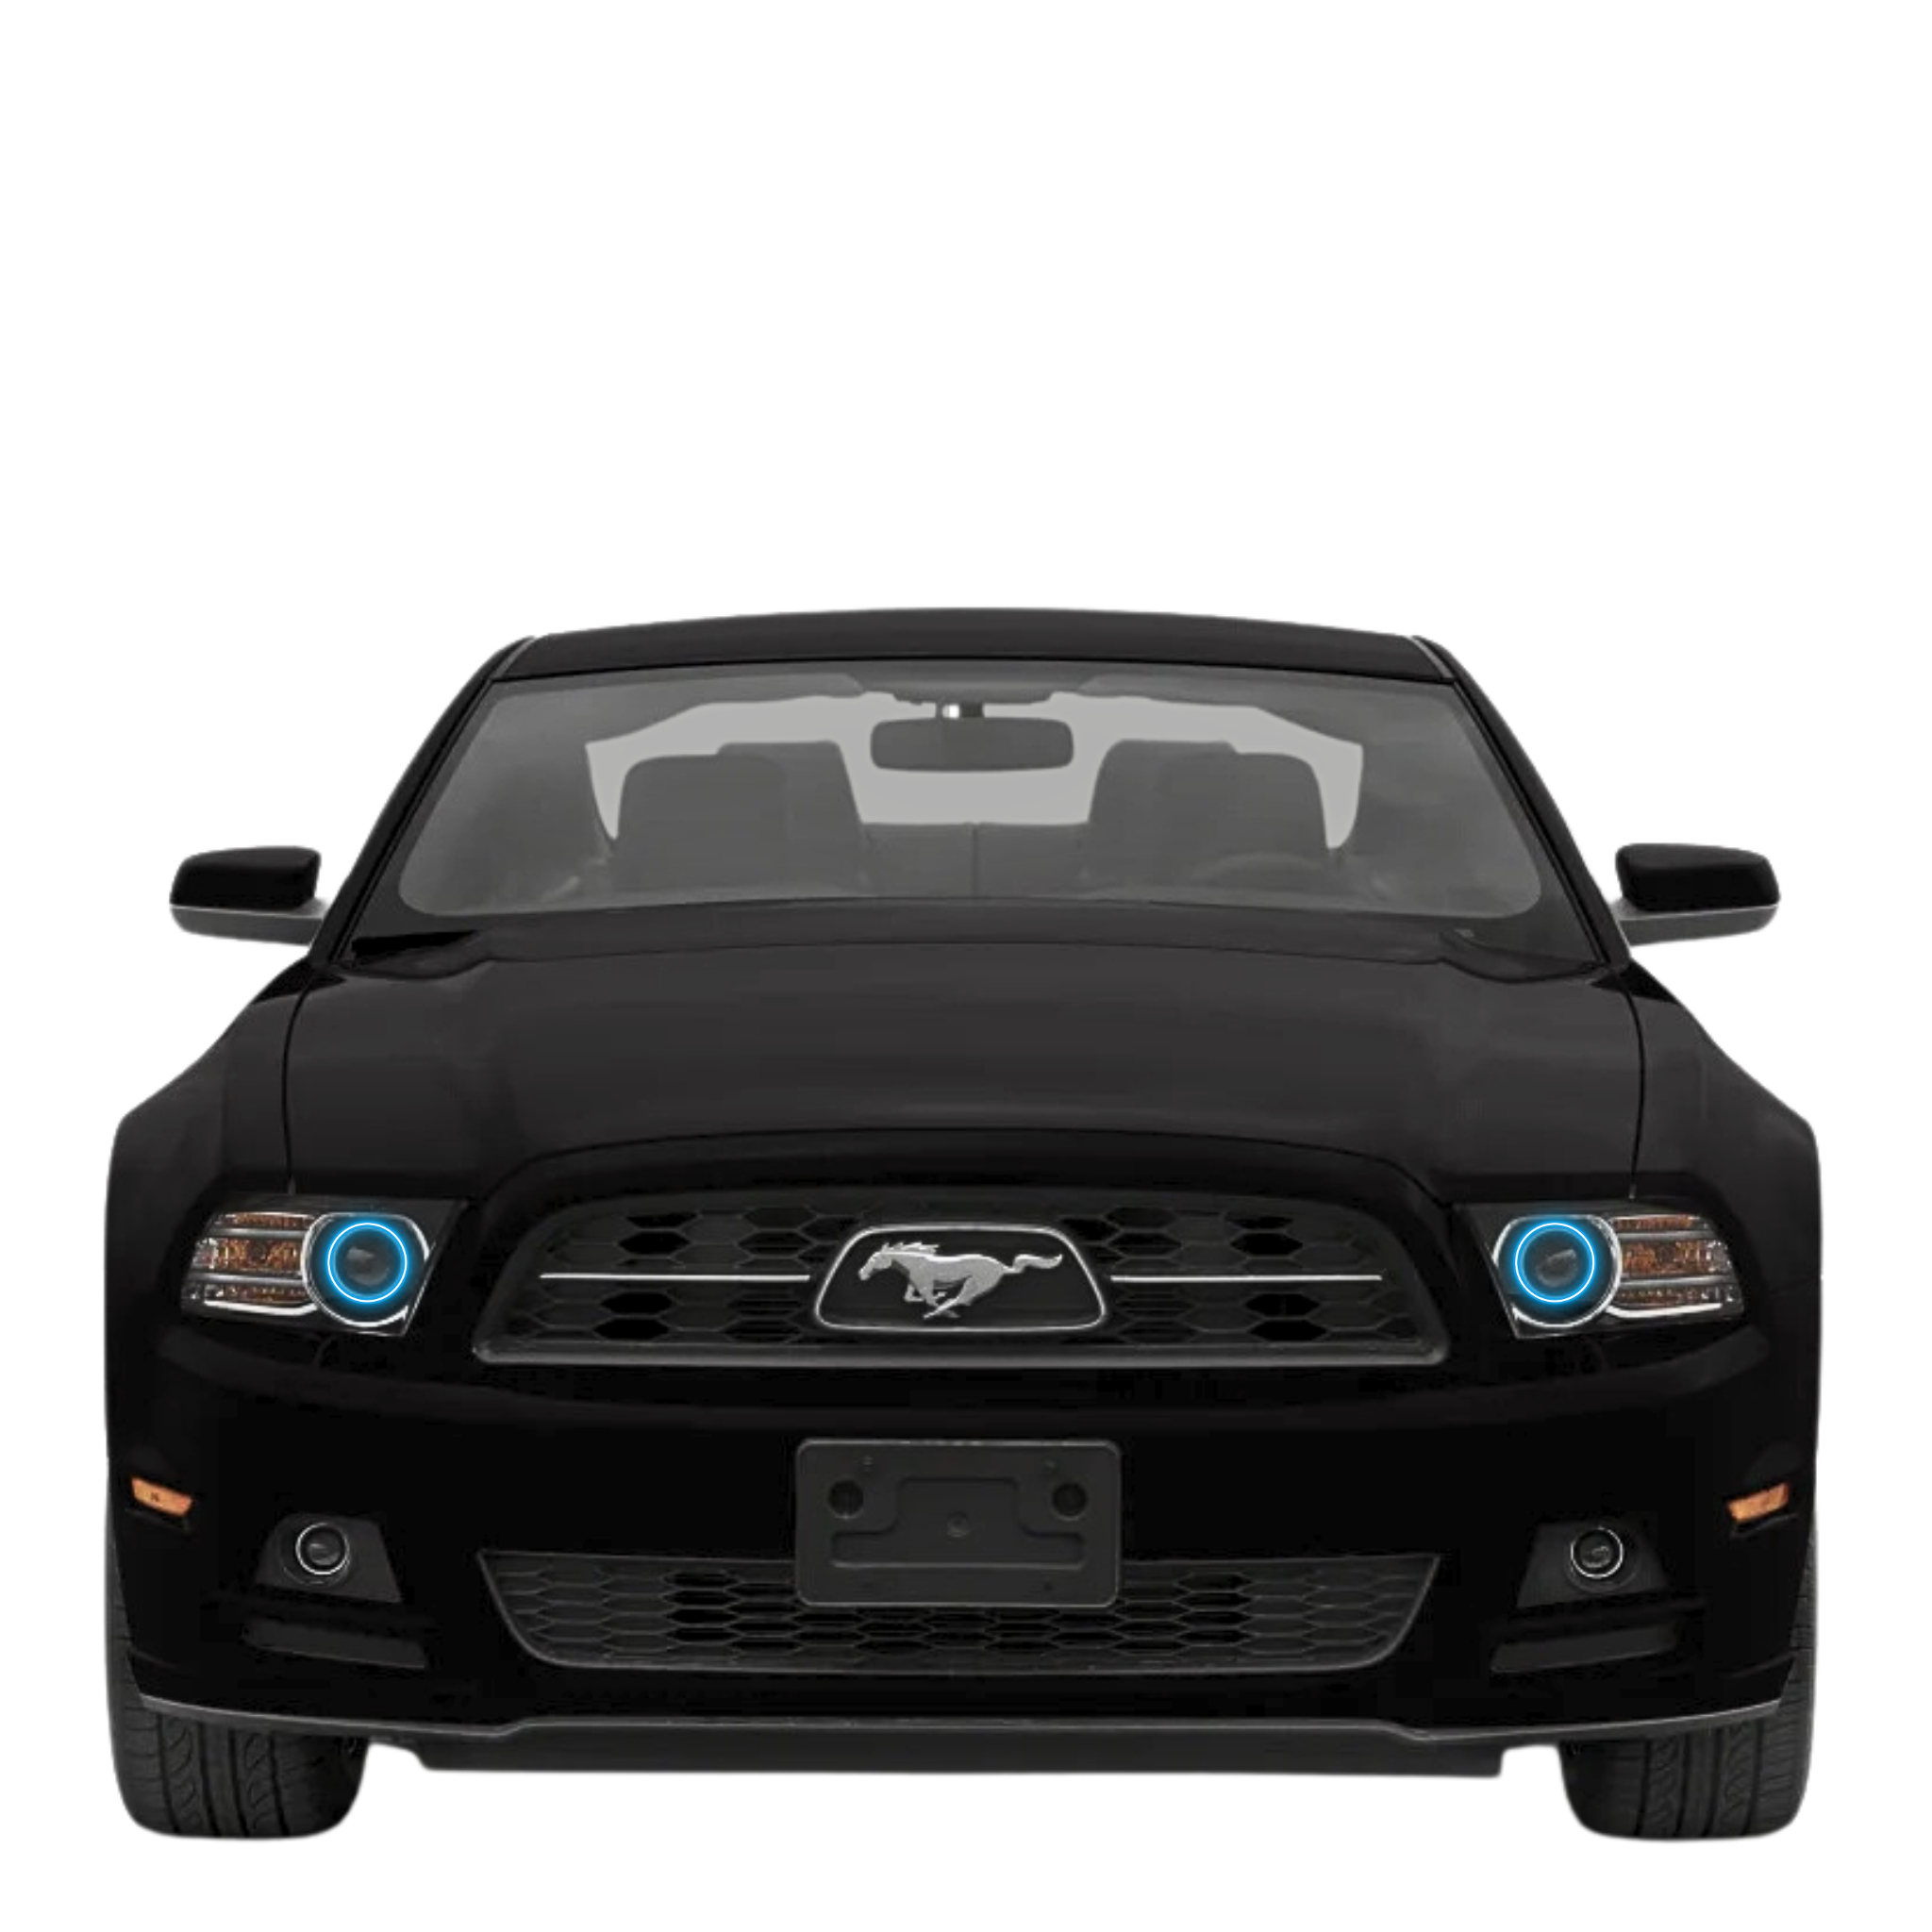 2010-2013 Ford Mustang Multicolor Halo Kit - RGB Halo Kits Multicolor Flow Series Color Chasing RGBWA LED headlight kit Colorshift Oracle Lighting Trendz OneUpLighting Morimoto theretrofitsource AutoLEDTech Diode Dynamics